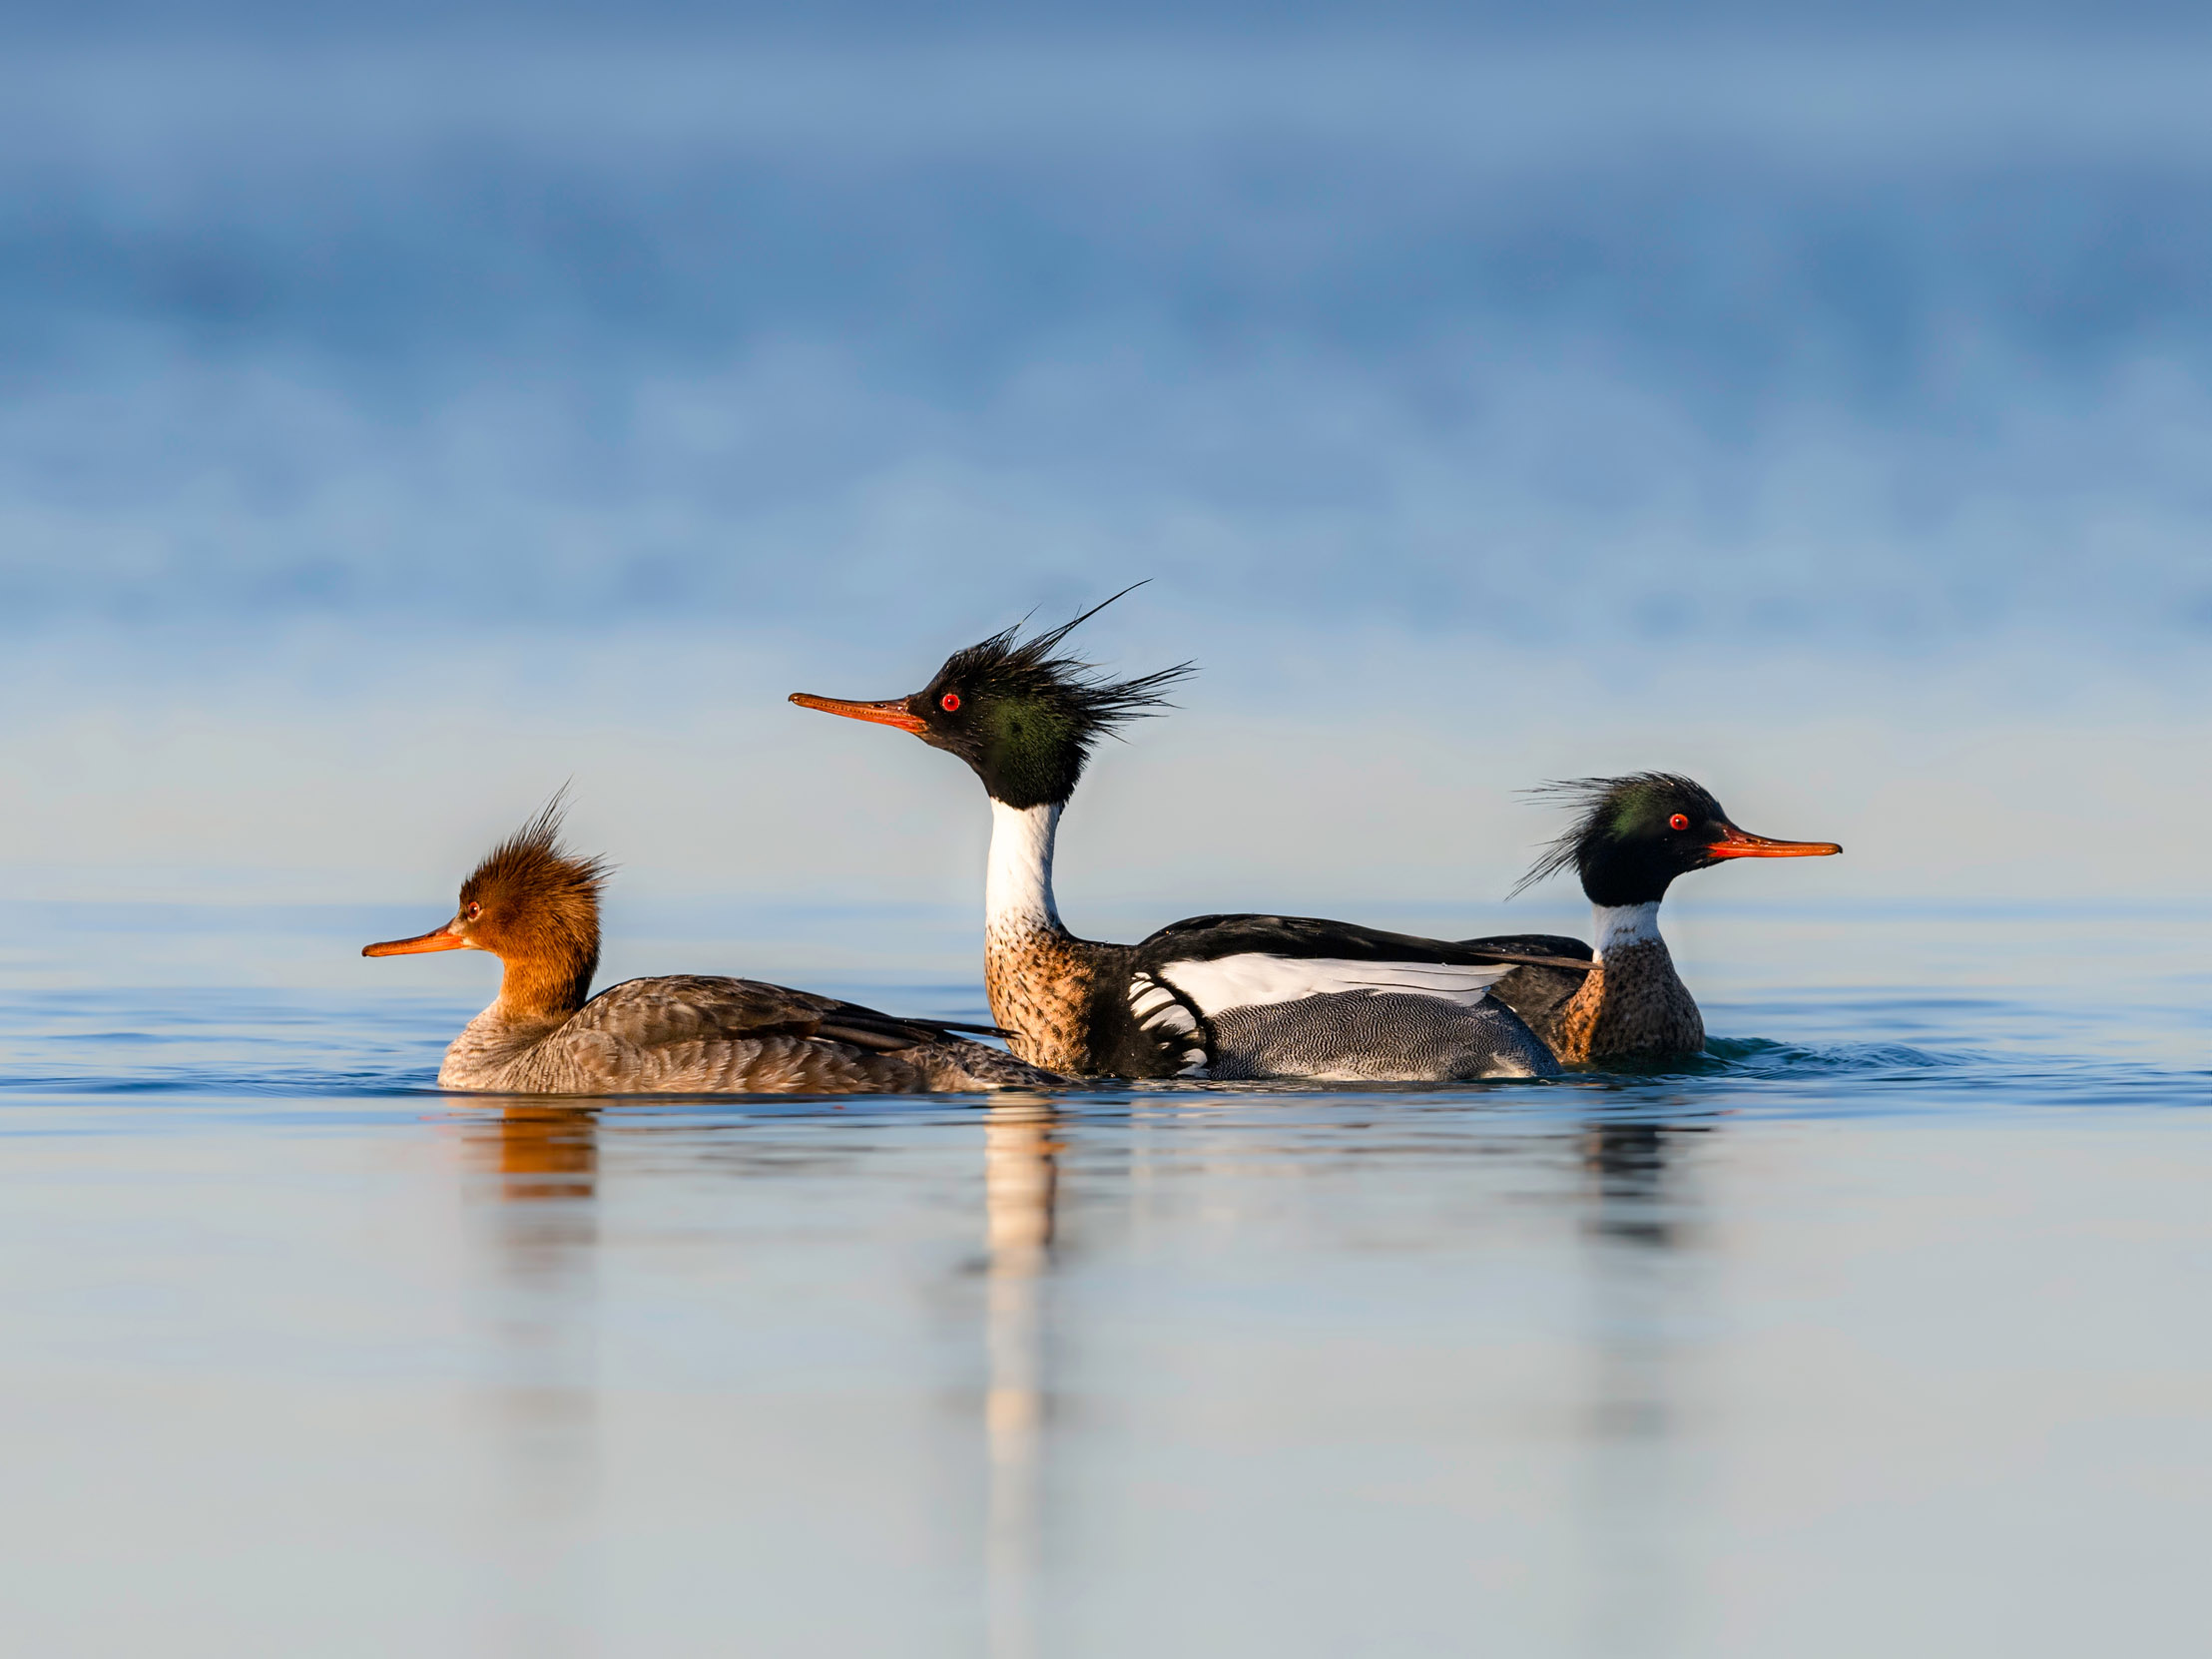 Three Red-breasted Merganser swimming on a still body of water.